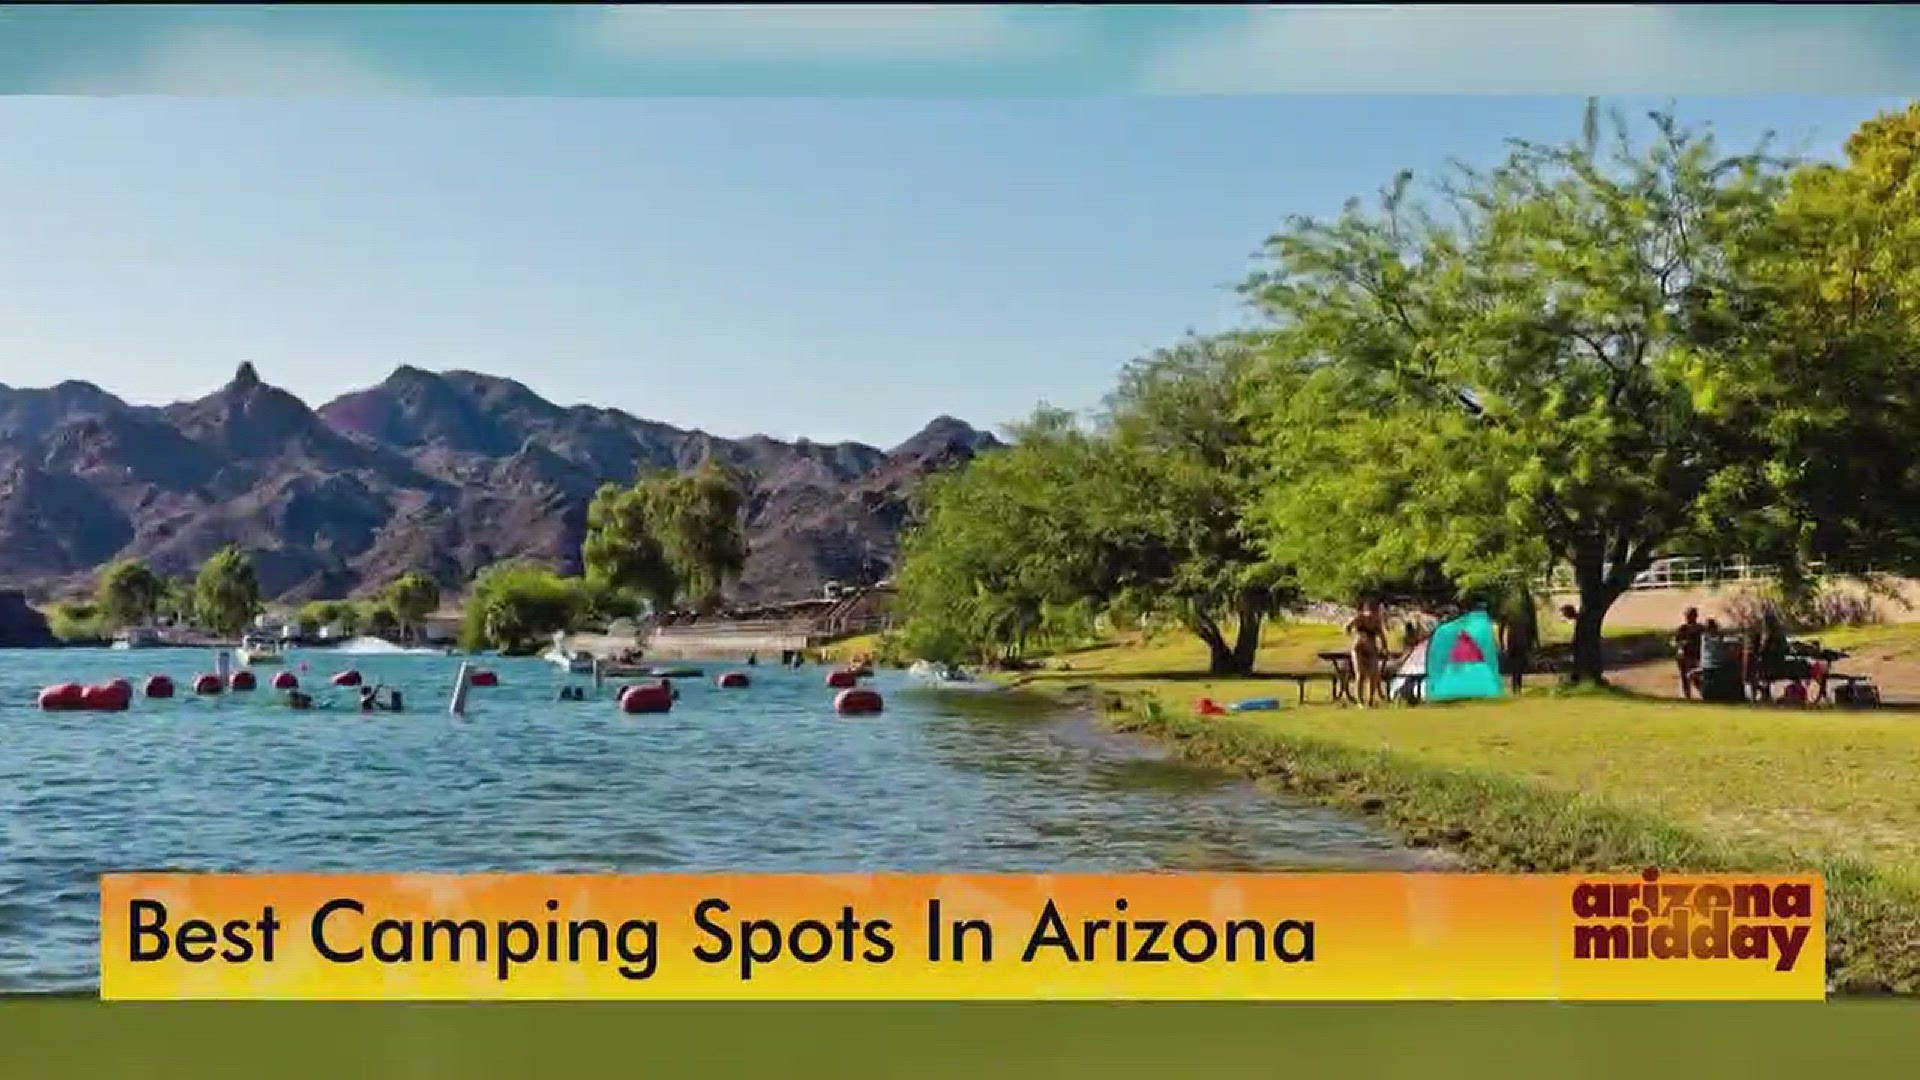 Arizona has something for everyone when it comes to camping spots. We round up some of the best.